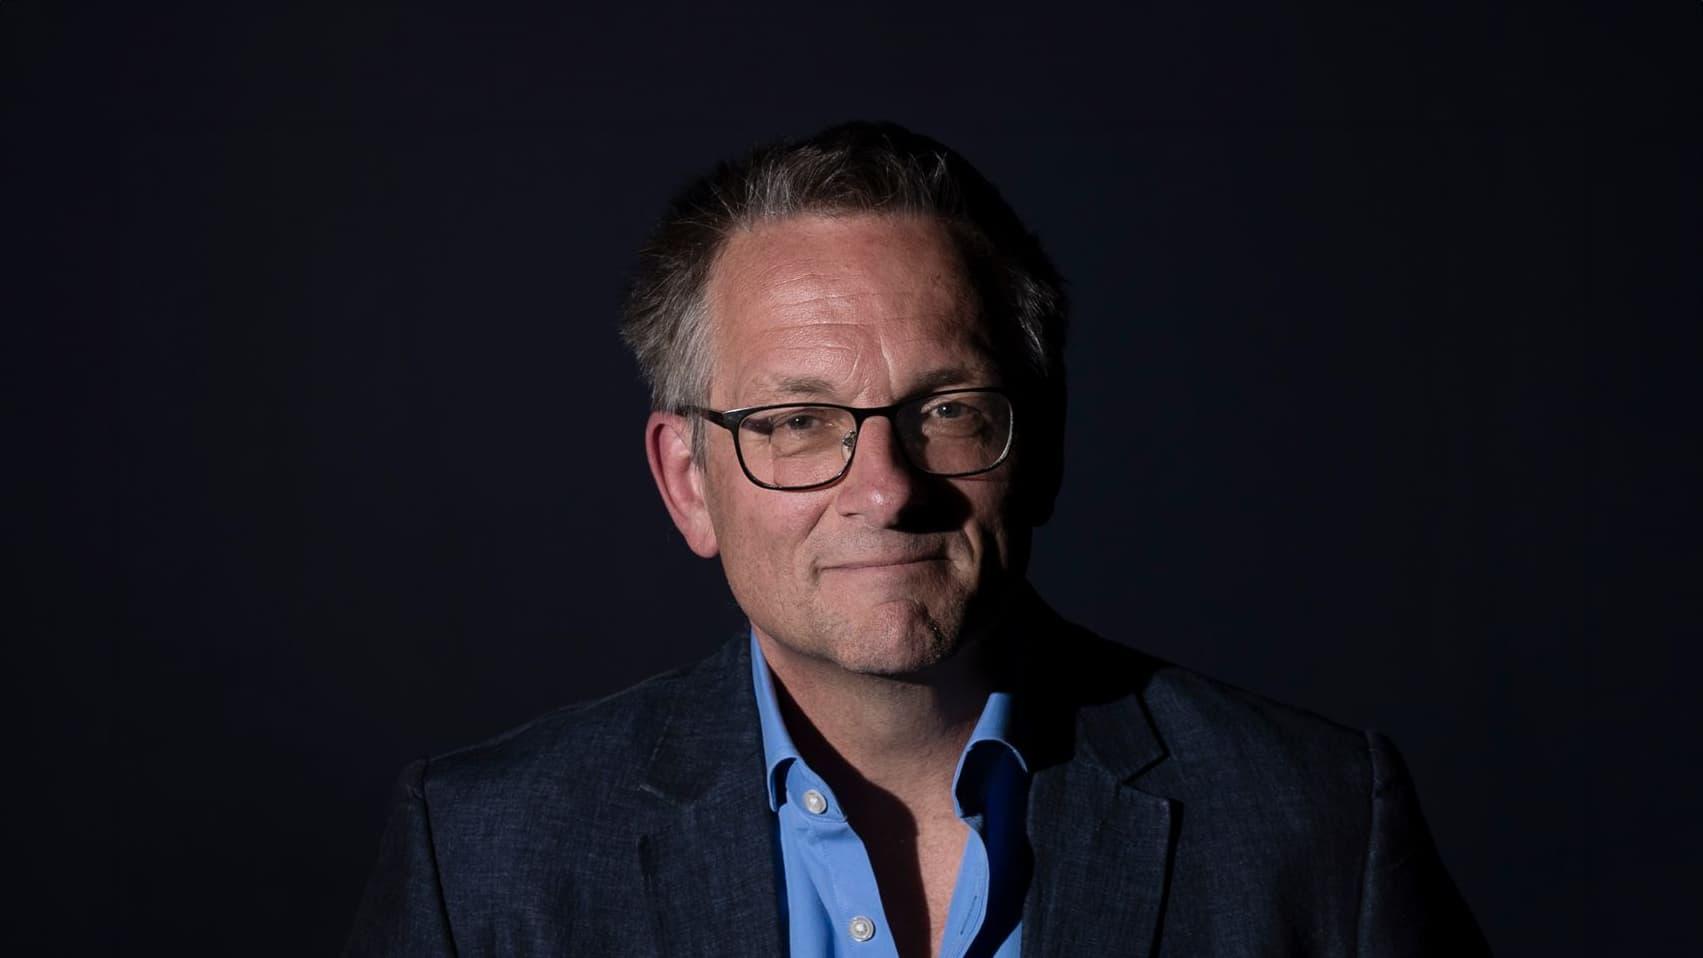 Michael Mosley The Doctor That Changed Britain